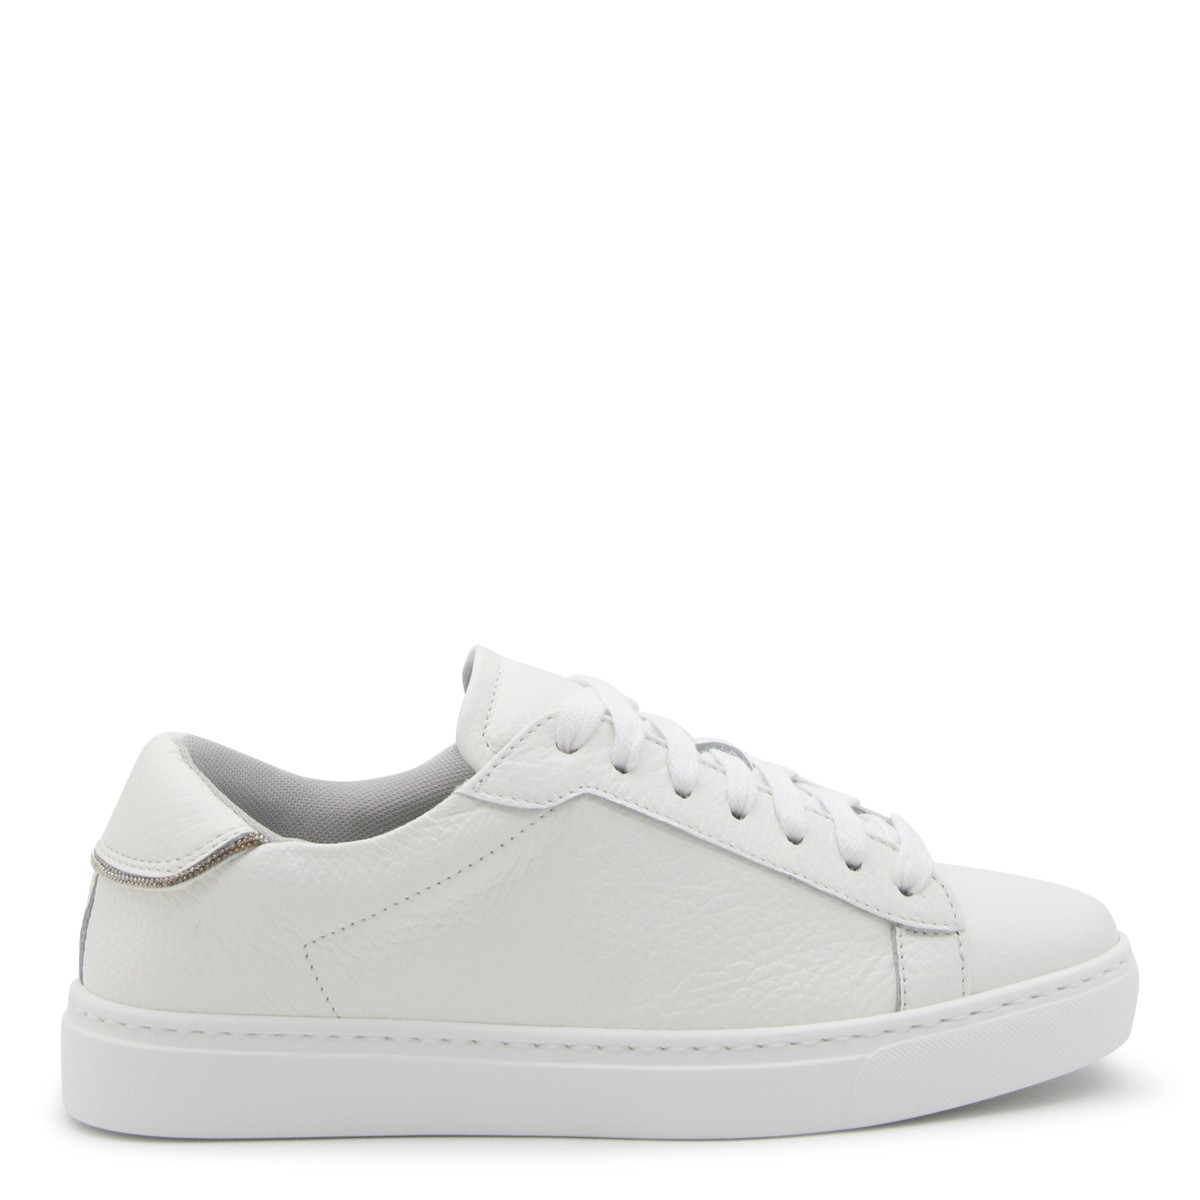 WHITE LEATHER DALILA SNEAKERS